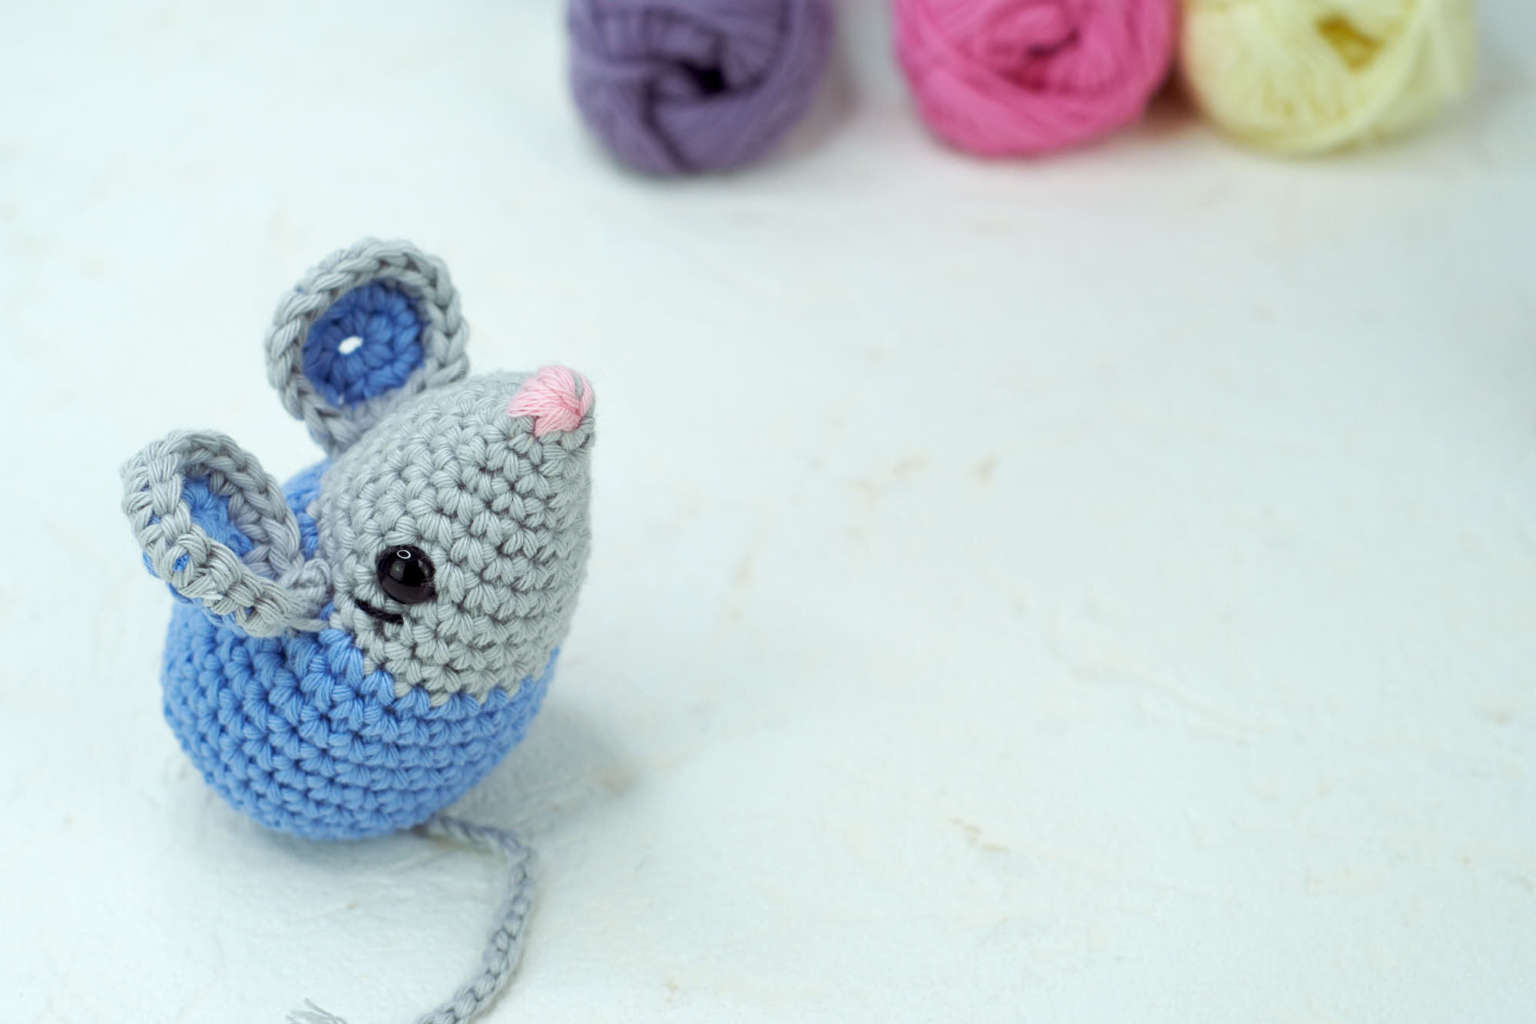 How to crochet an easy amigurumi mouse - a free crochet pattern